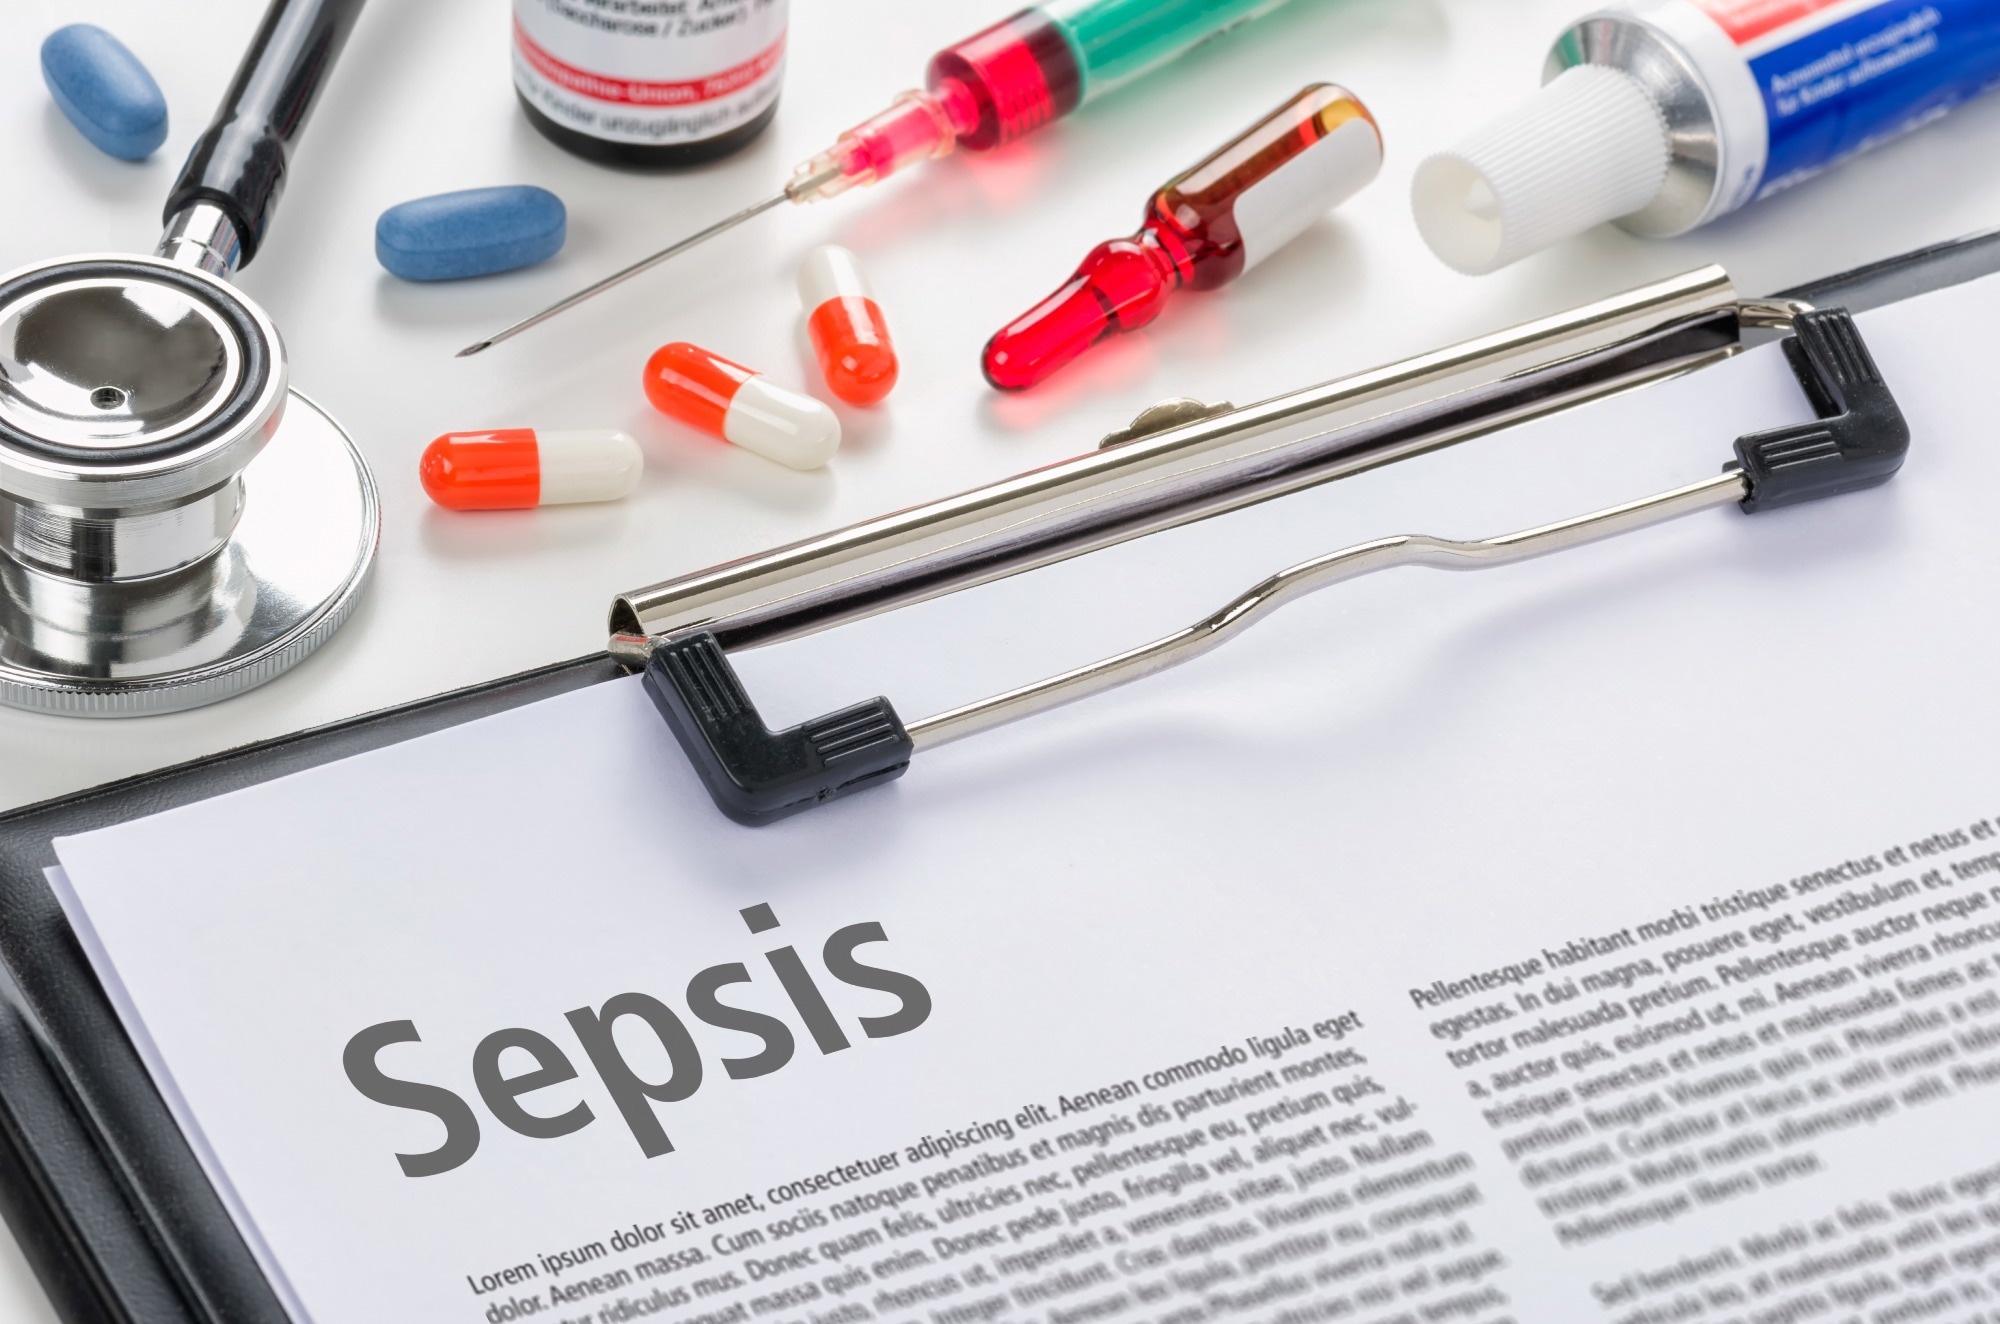 Study: Effects of Vitamin D Deficiency on Sepsis. Image Credit: Zerbor/Shutterstock.com